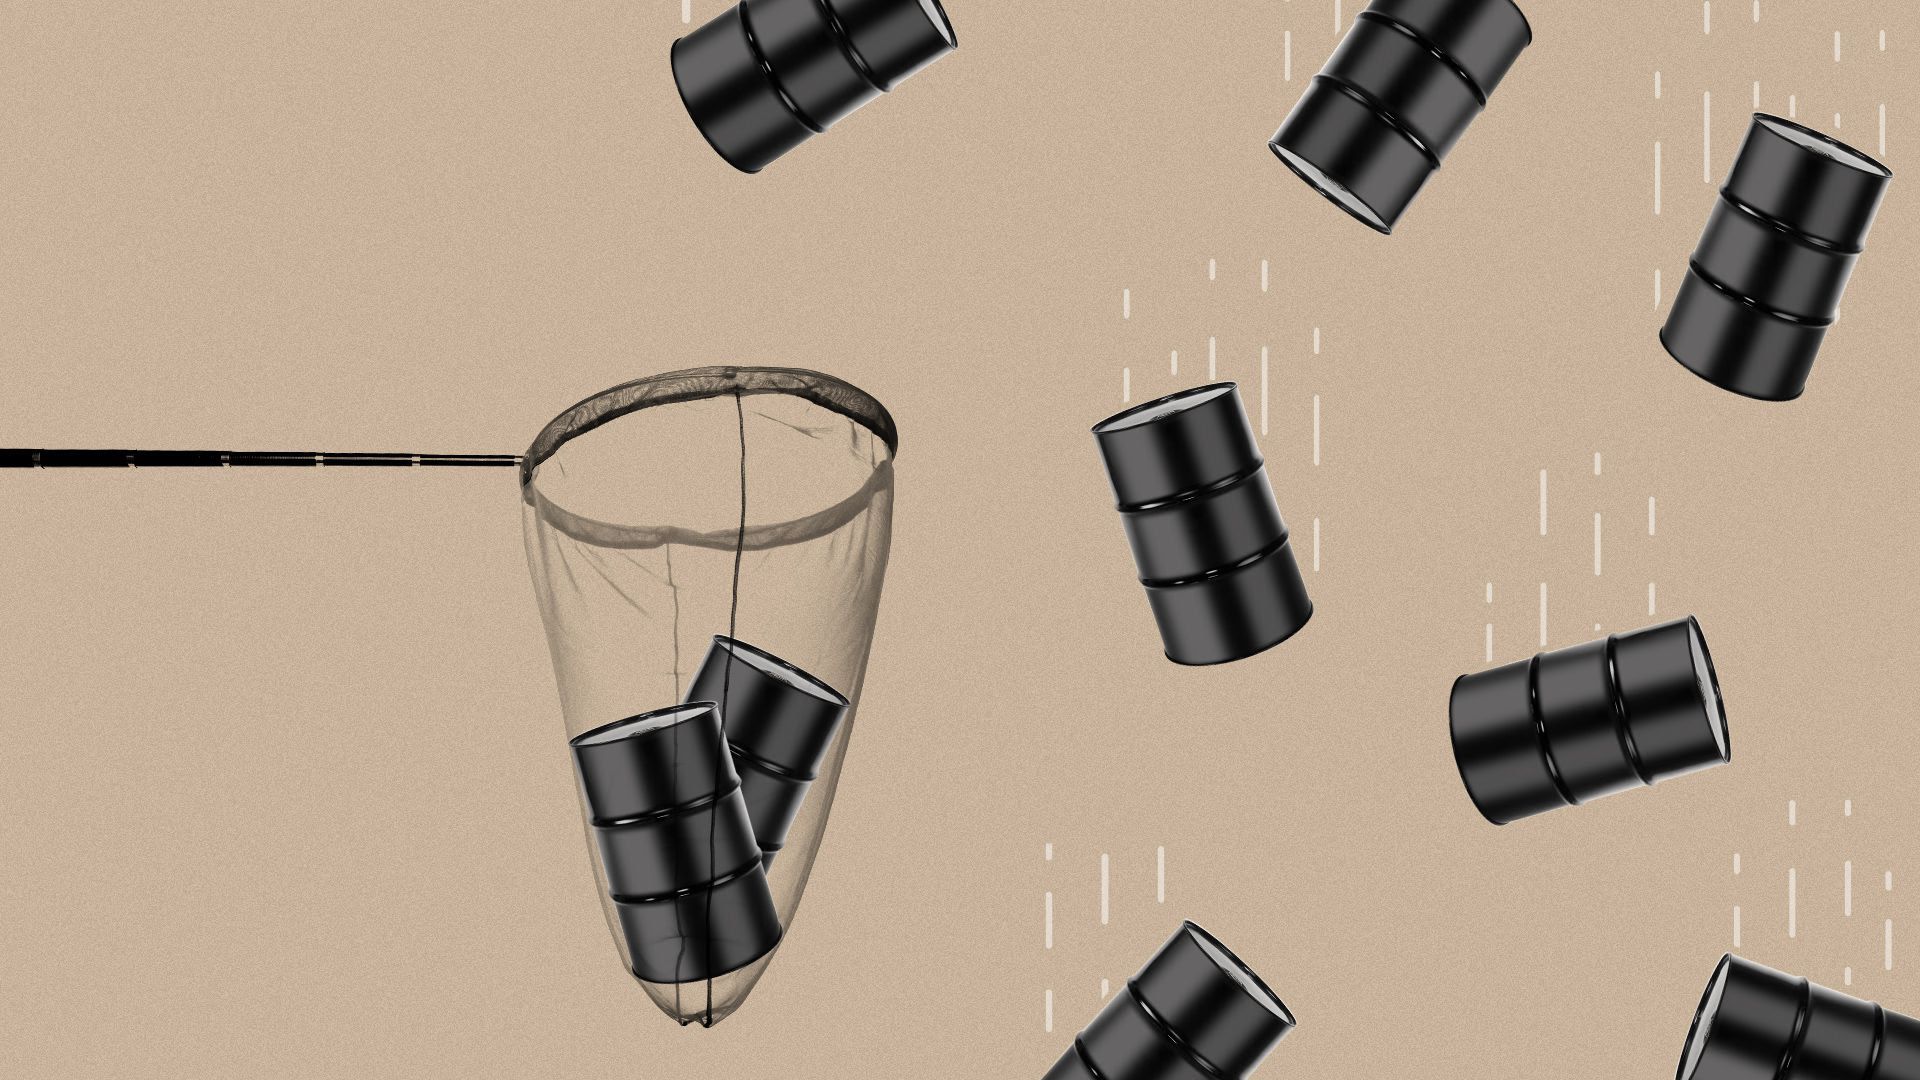 Illustration of a net trying to catch oil barrels